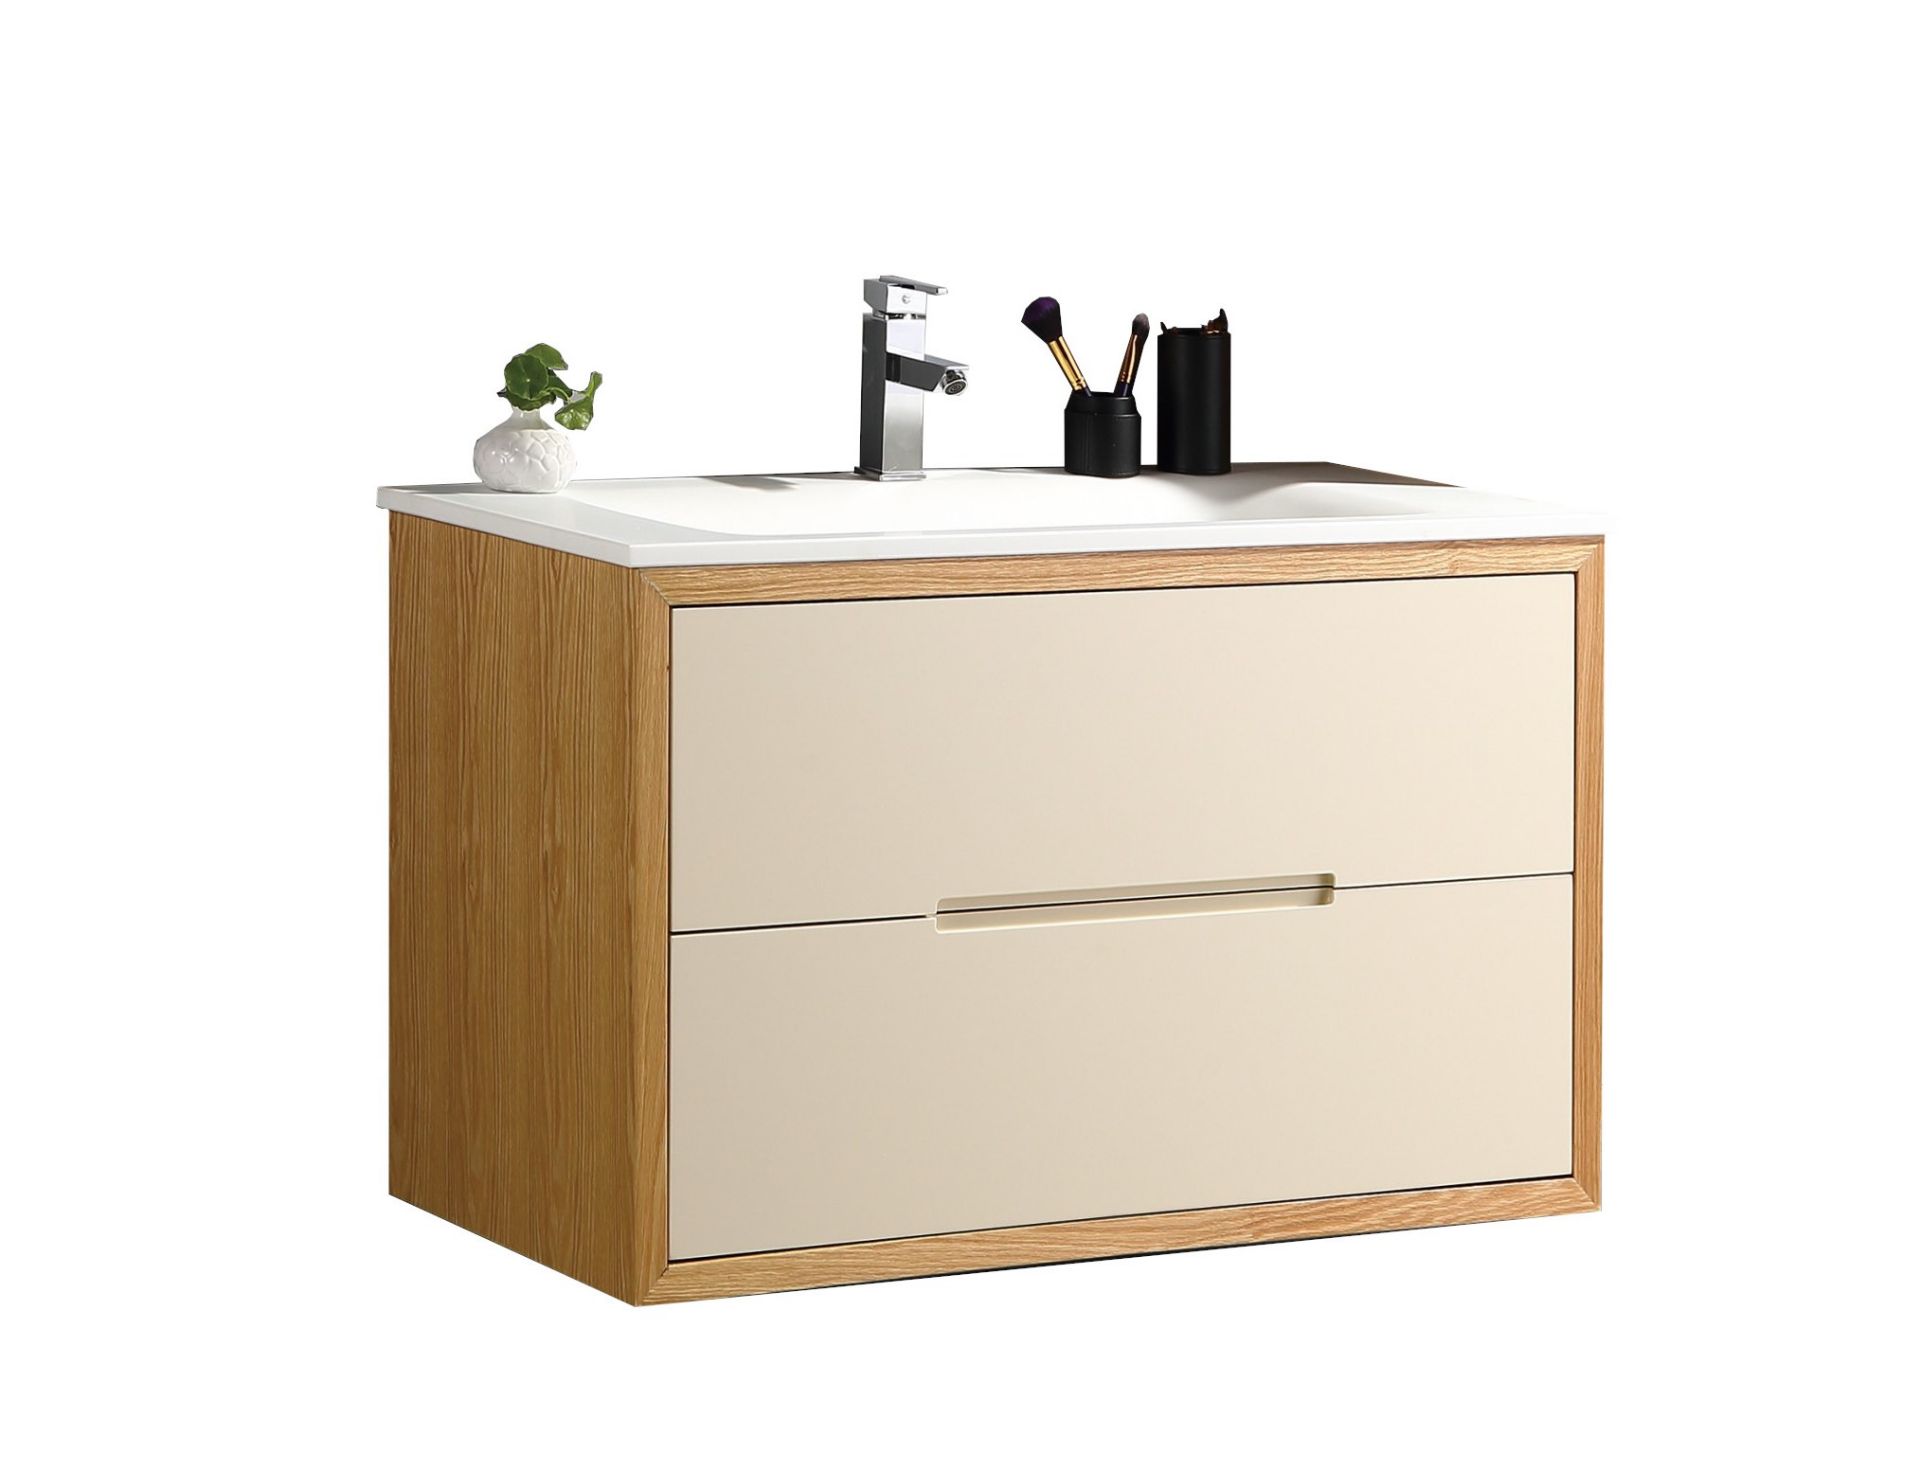 BRAND NEW 5 Sets of Complete Vanity Sets in Beige with fixtures and fittings RRP £3999.99 *NO VAT* - Image 5 of 5